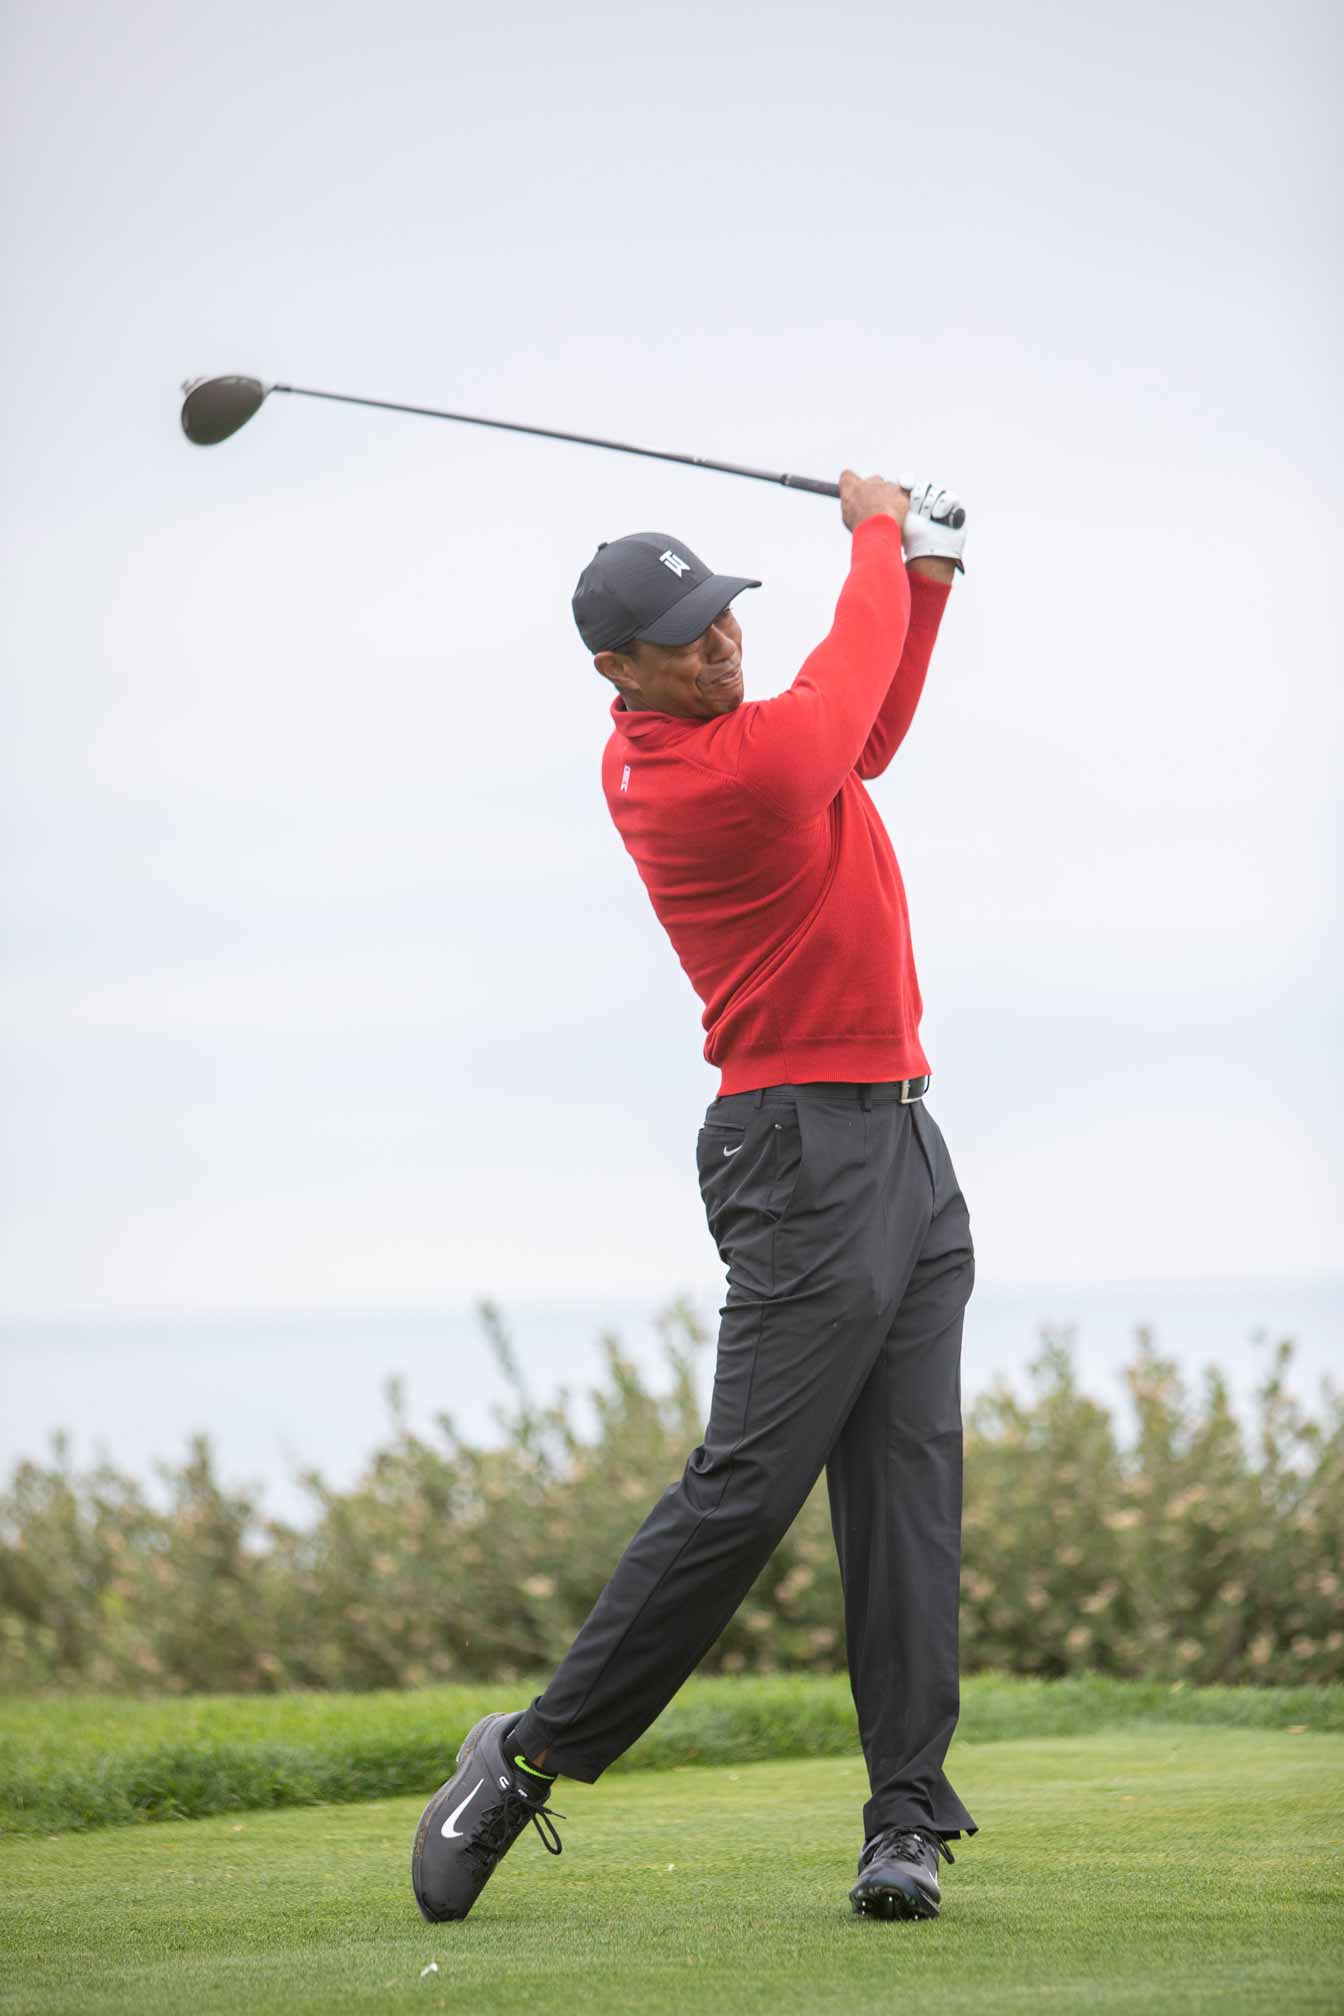 Copy these 6 moves from Tour pros to get the most out of your swing